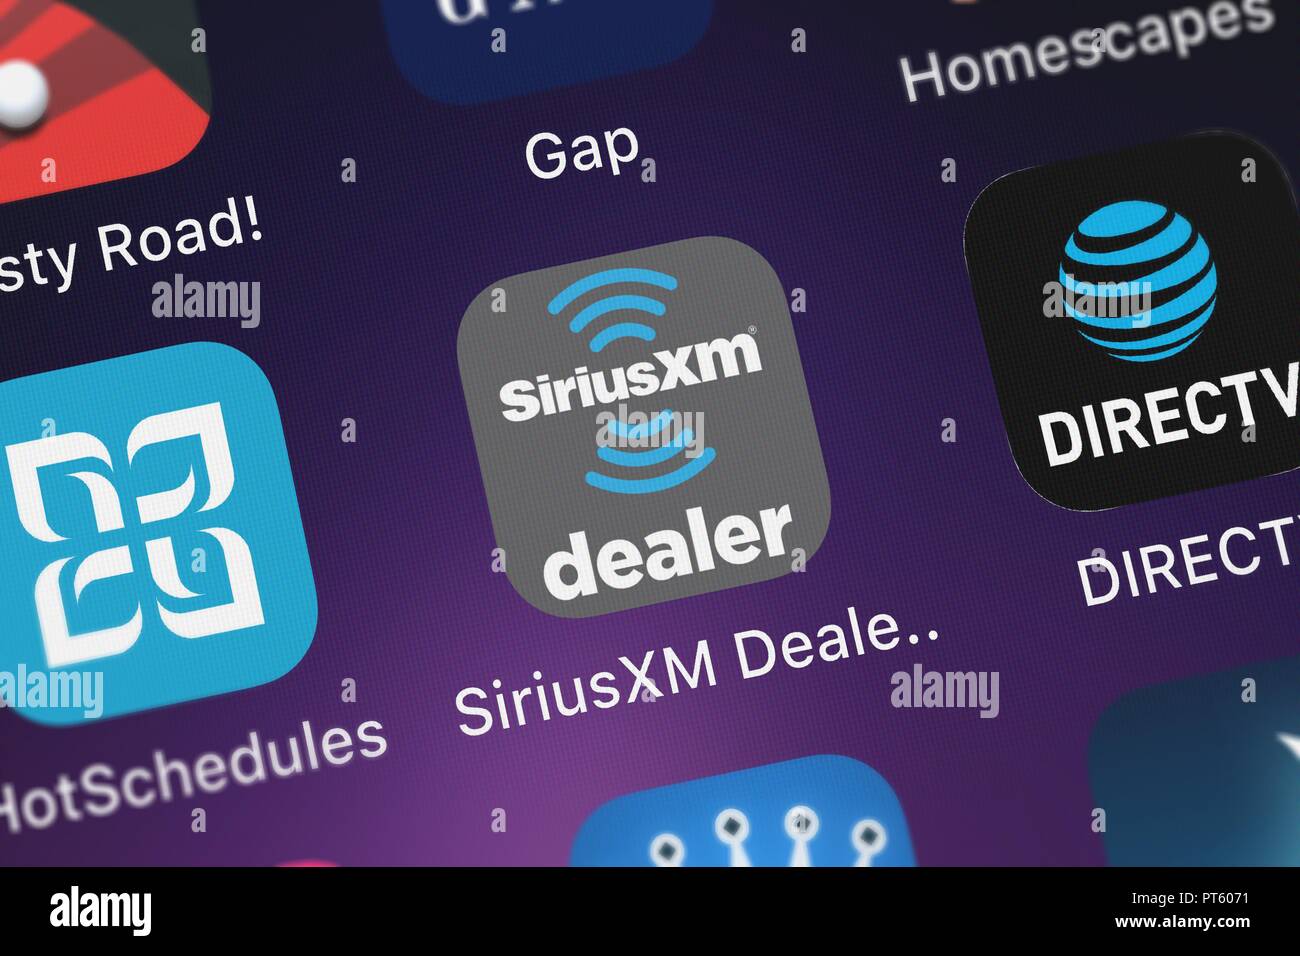 Sirius xm hires stock photography and images Alamy